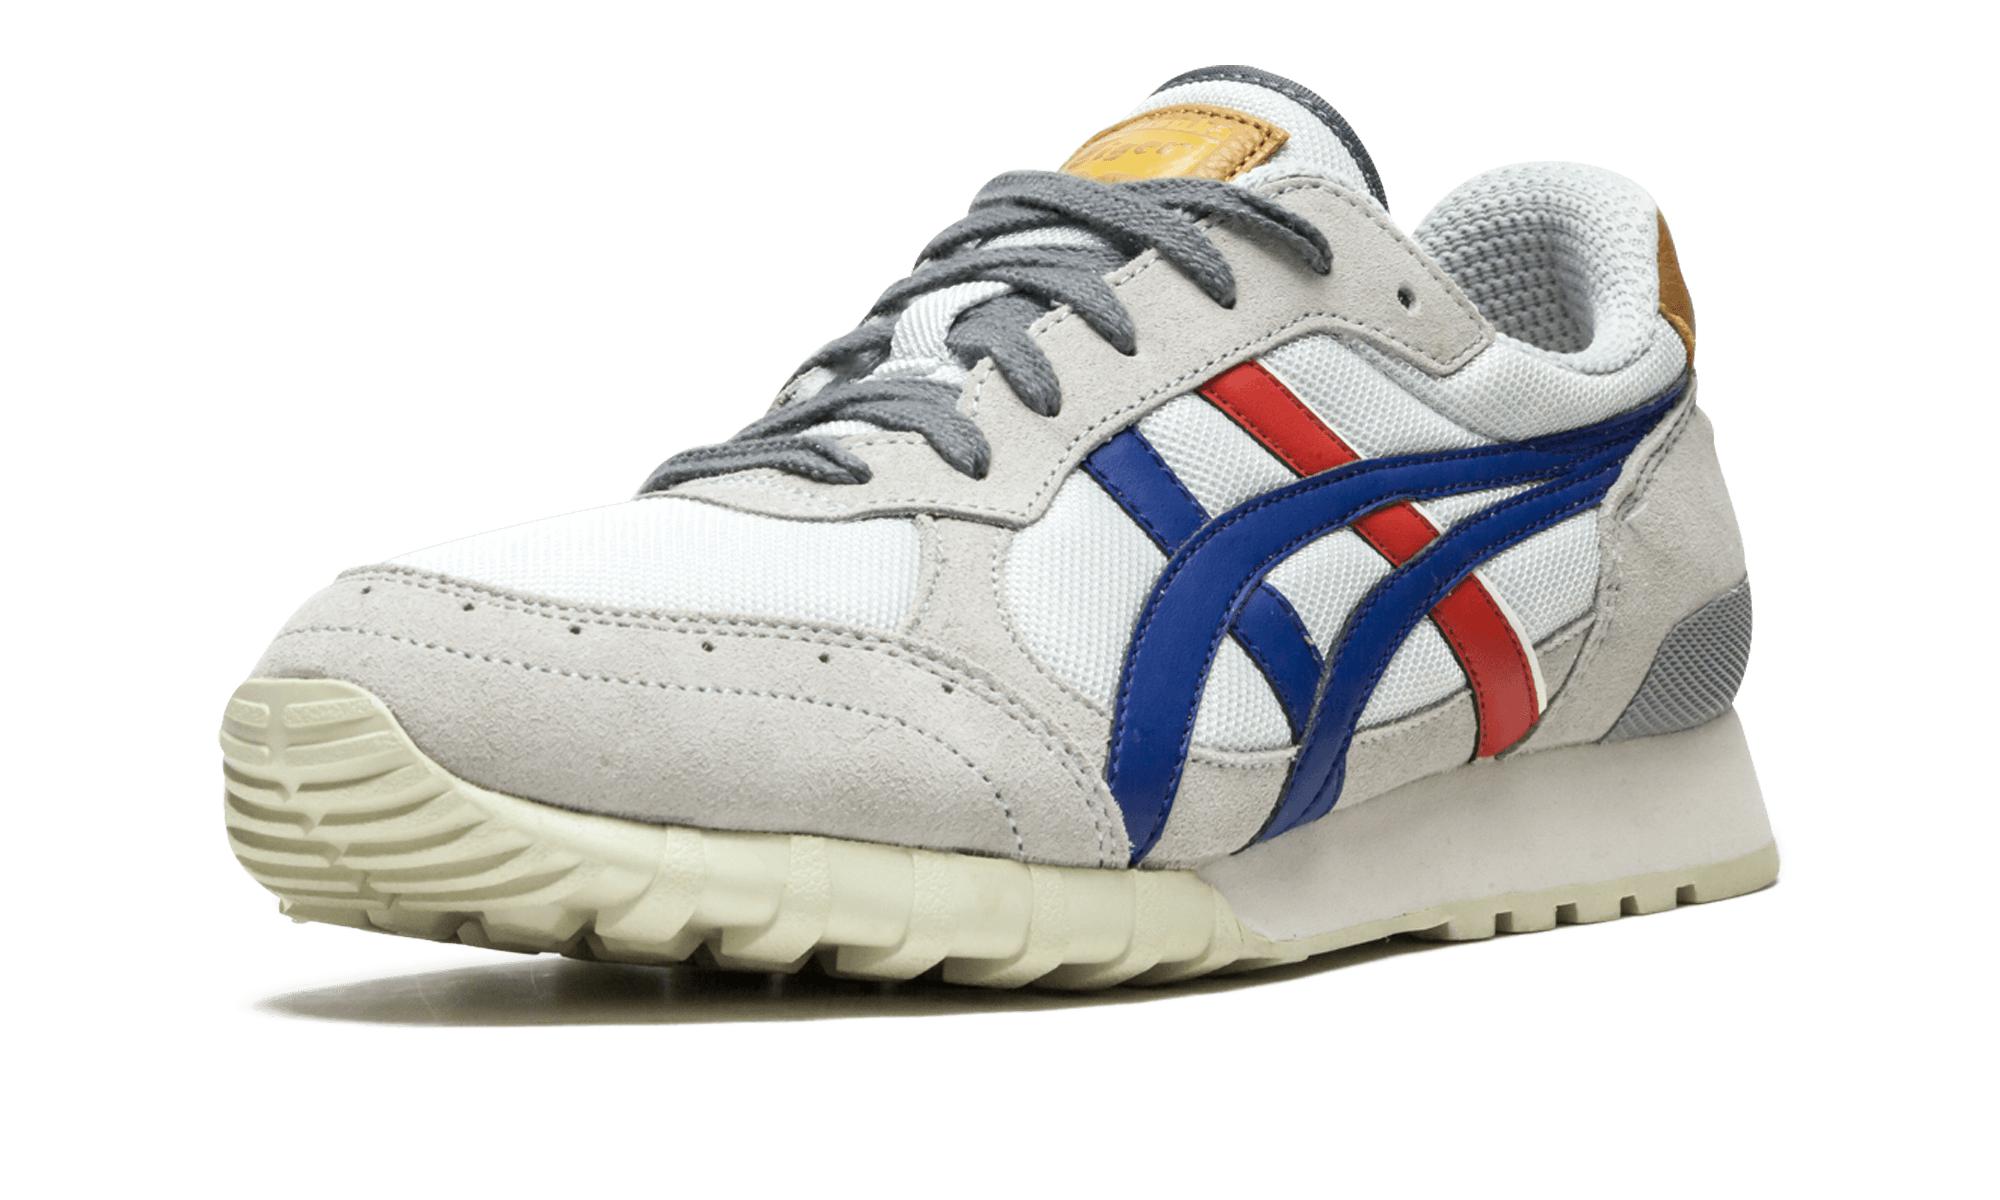 Asics Onitsuka Tiger in Blue,Grey,Red,White (Blue) for Men - Lyst